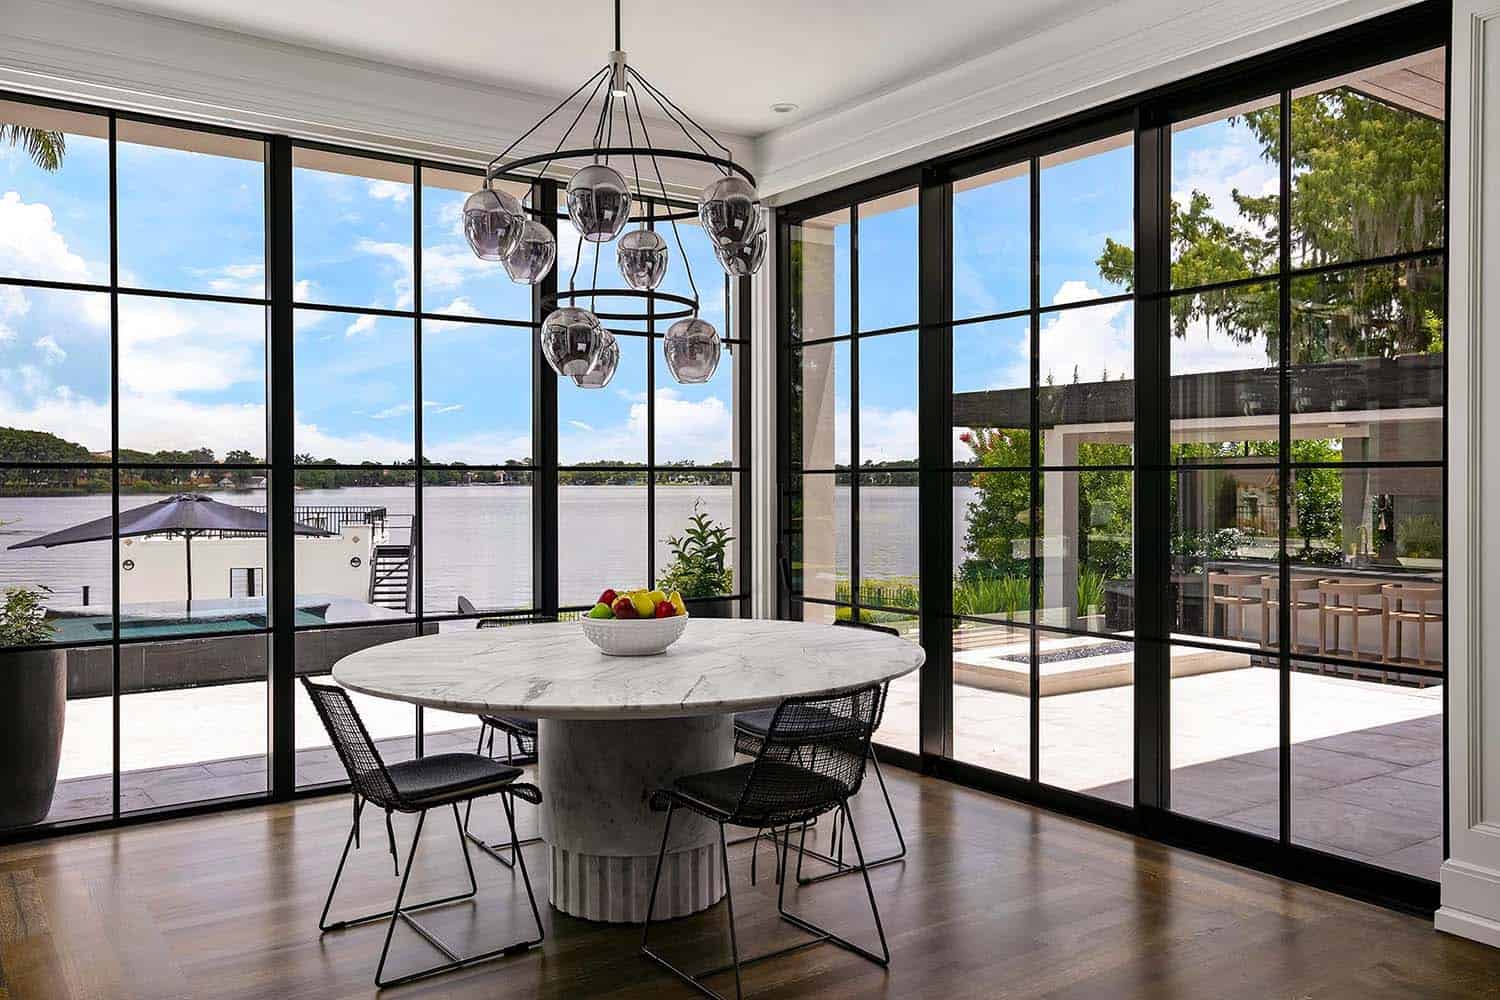 transitional style casual dining nook with floor-to-ceiling windows